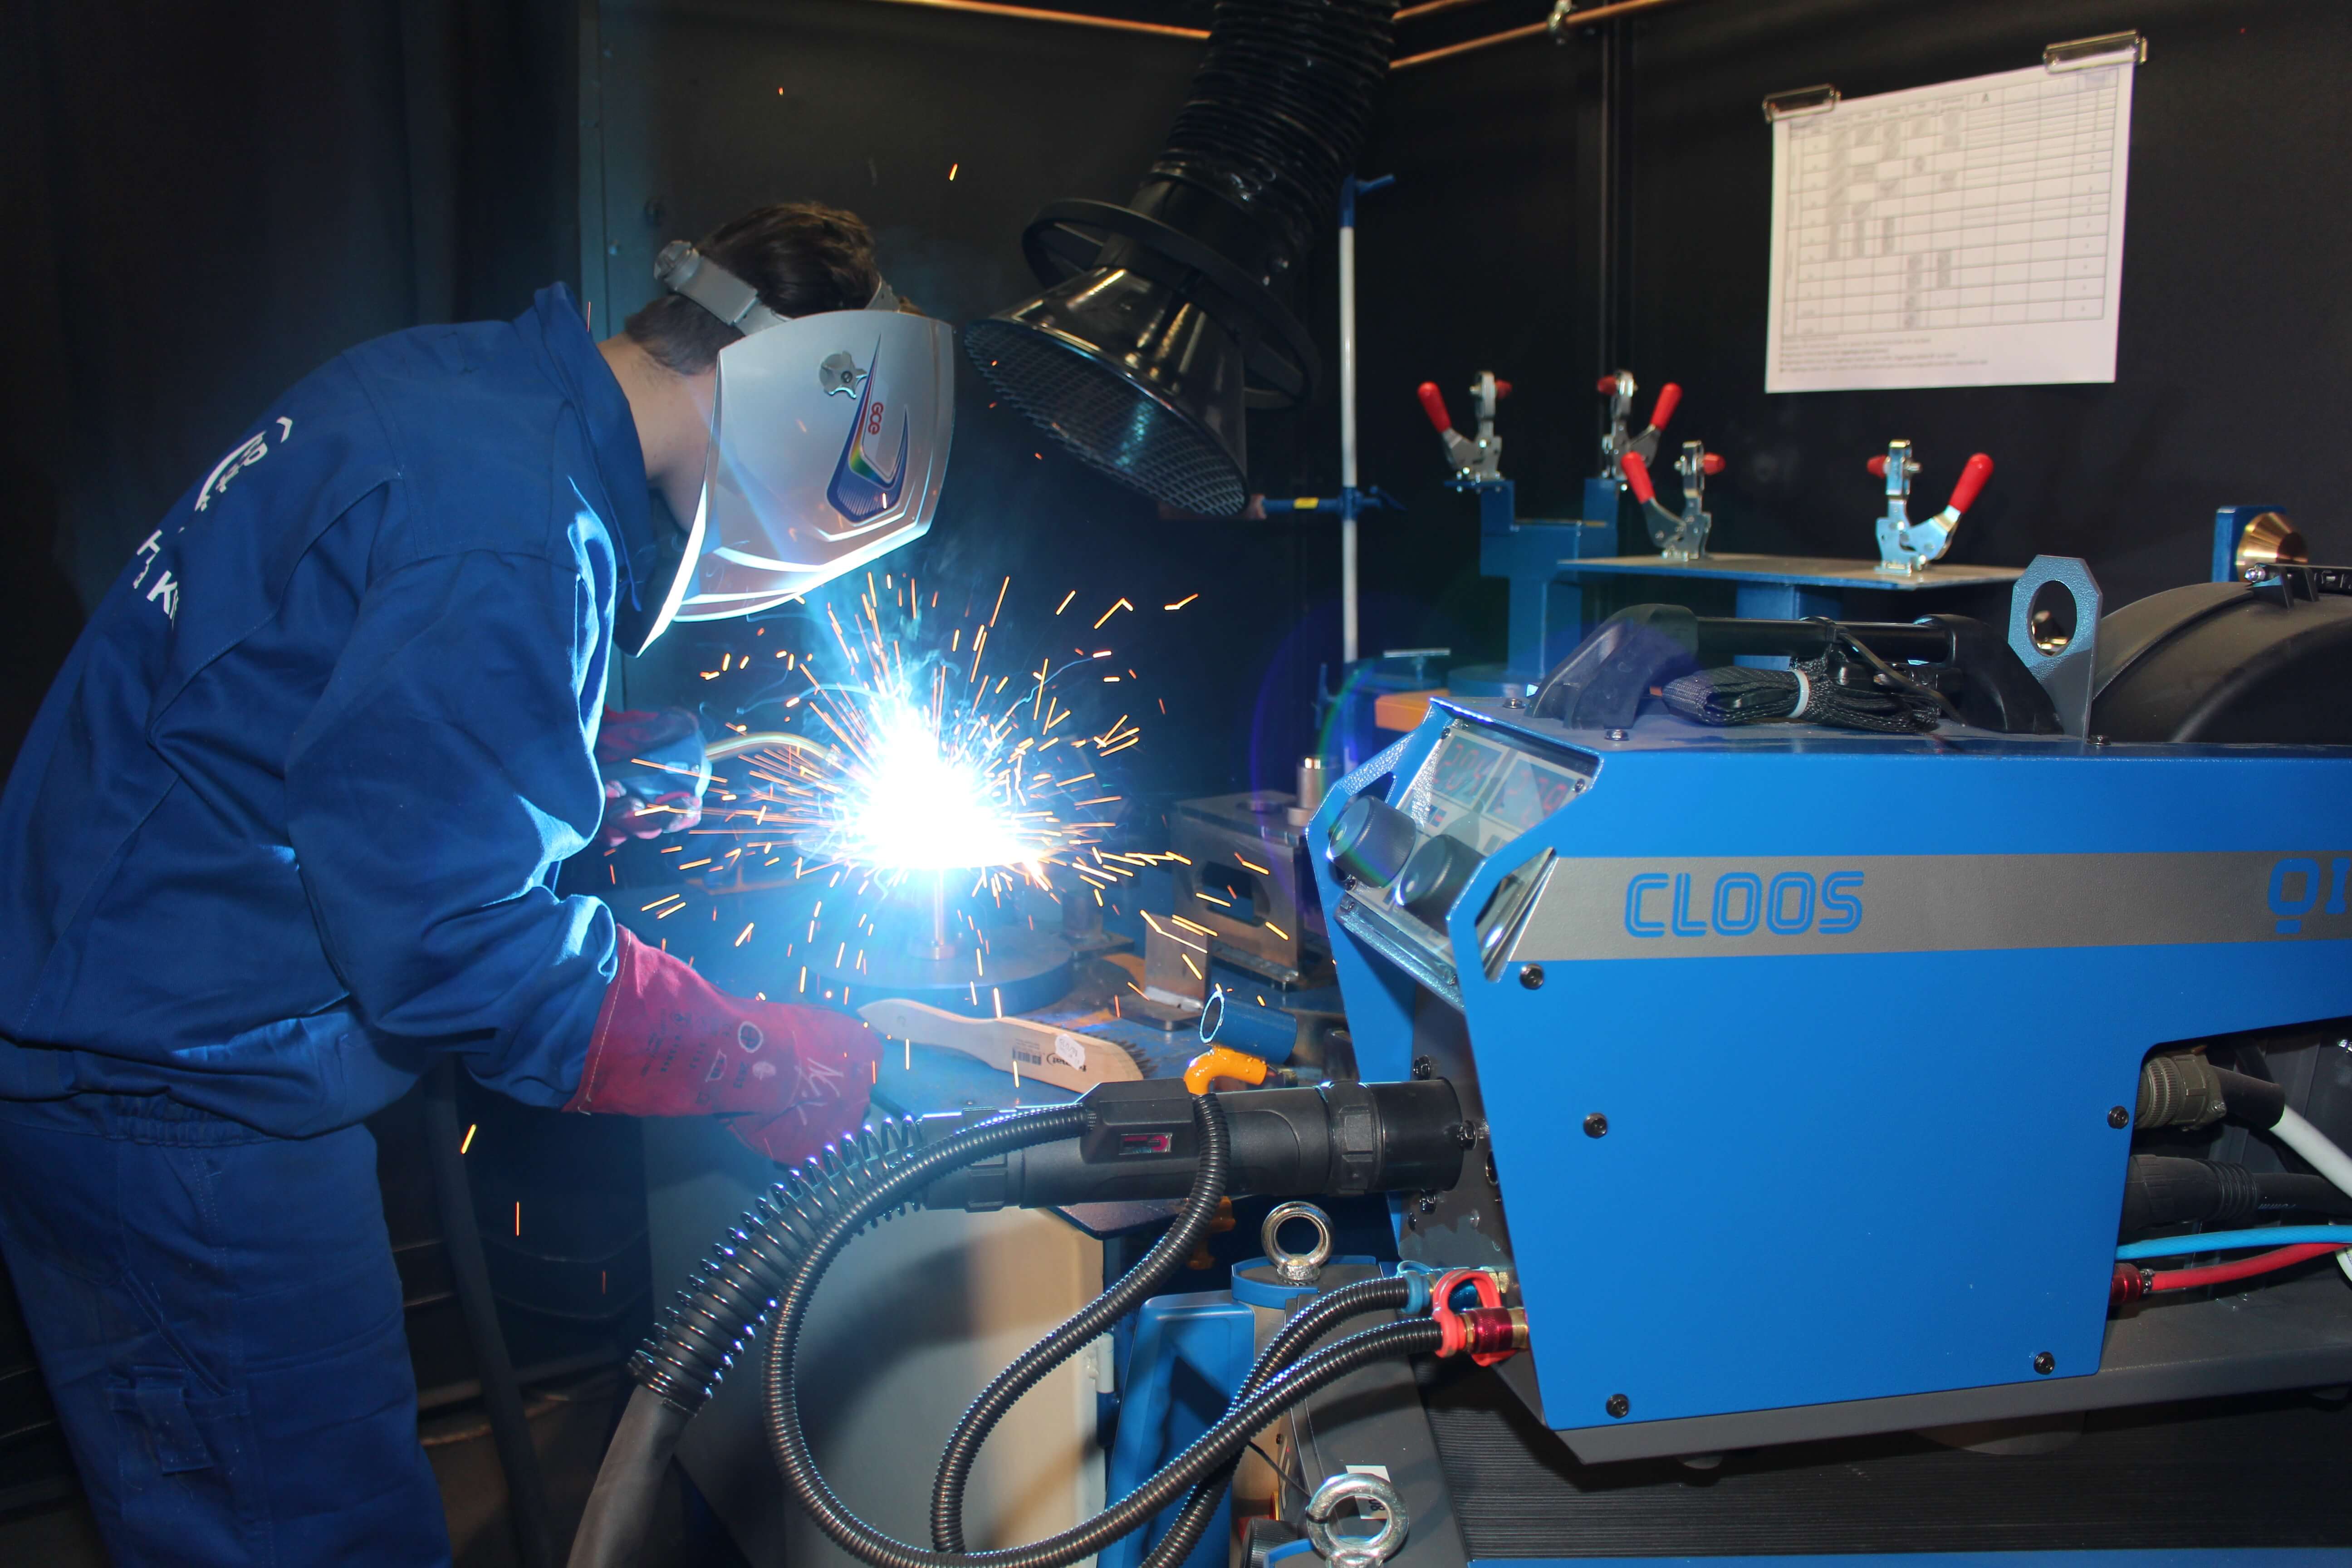 New QinTron welding power sources for BPW training centre